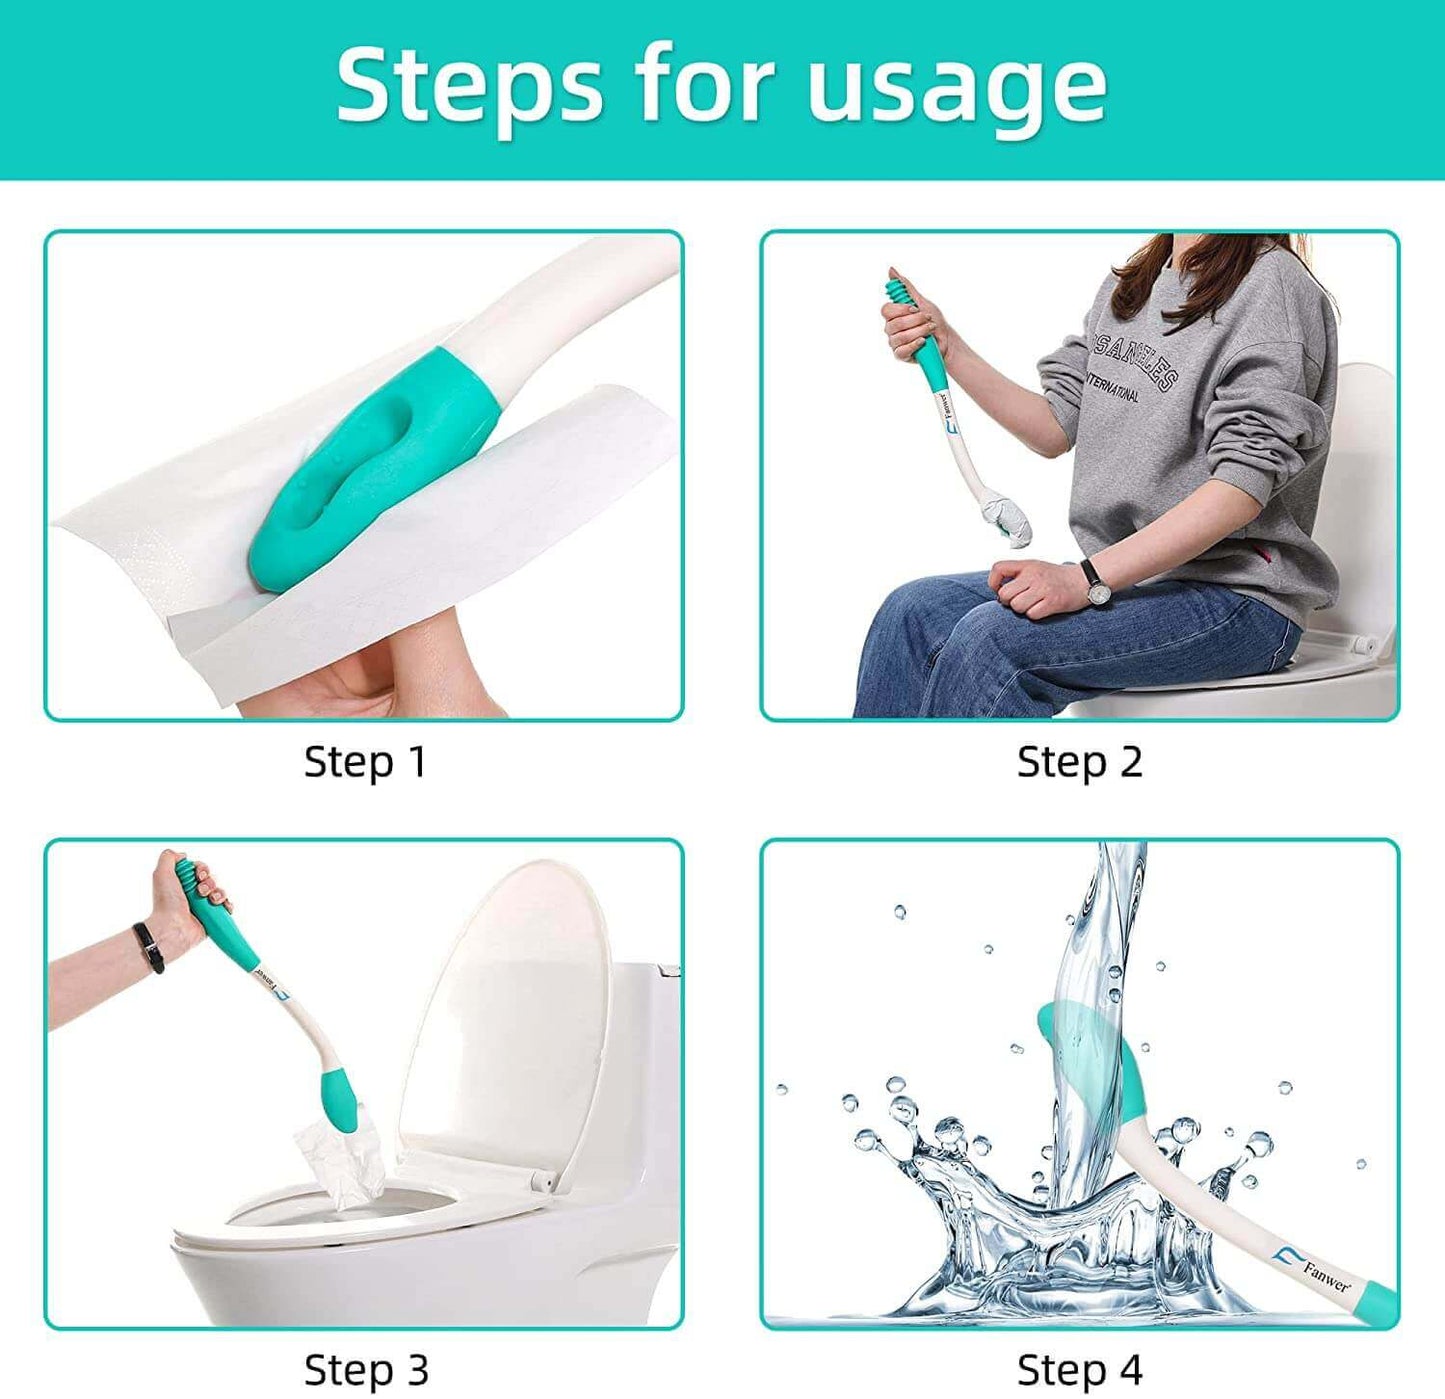 Fanwer toileting sand for wiping,toilet tissue paper wand for hygiene, steps of usage